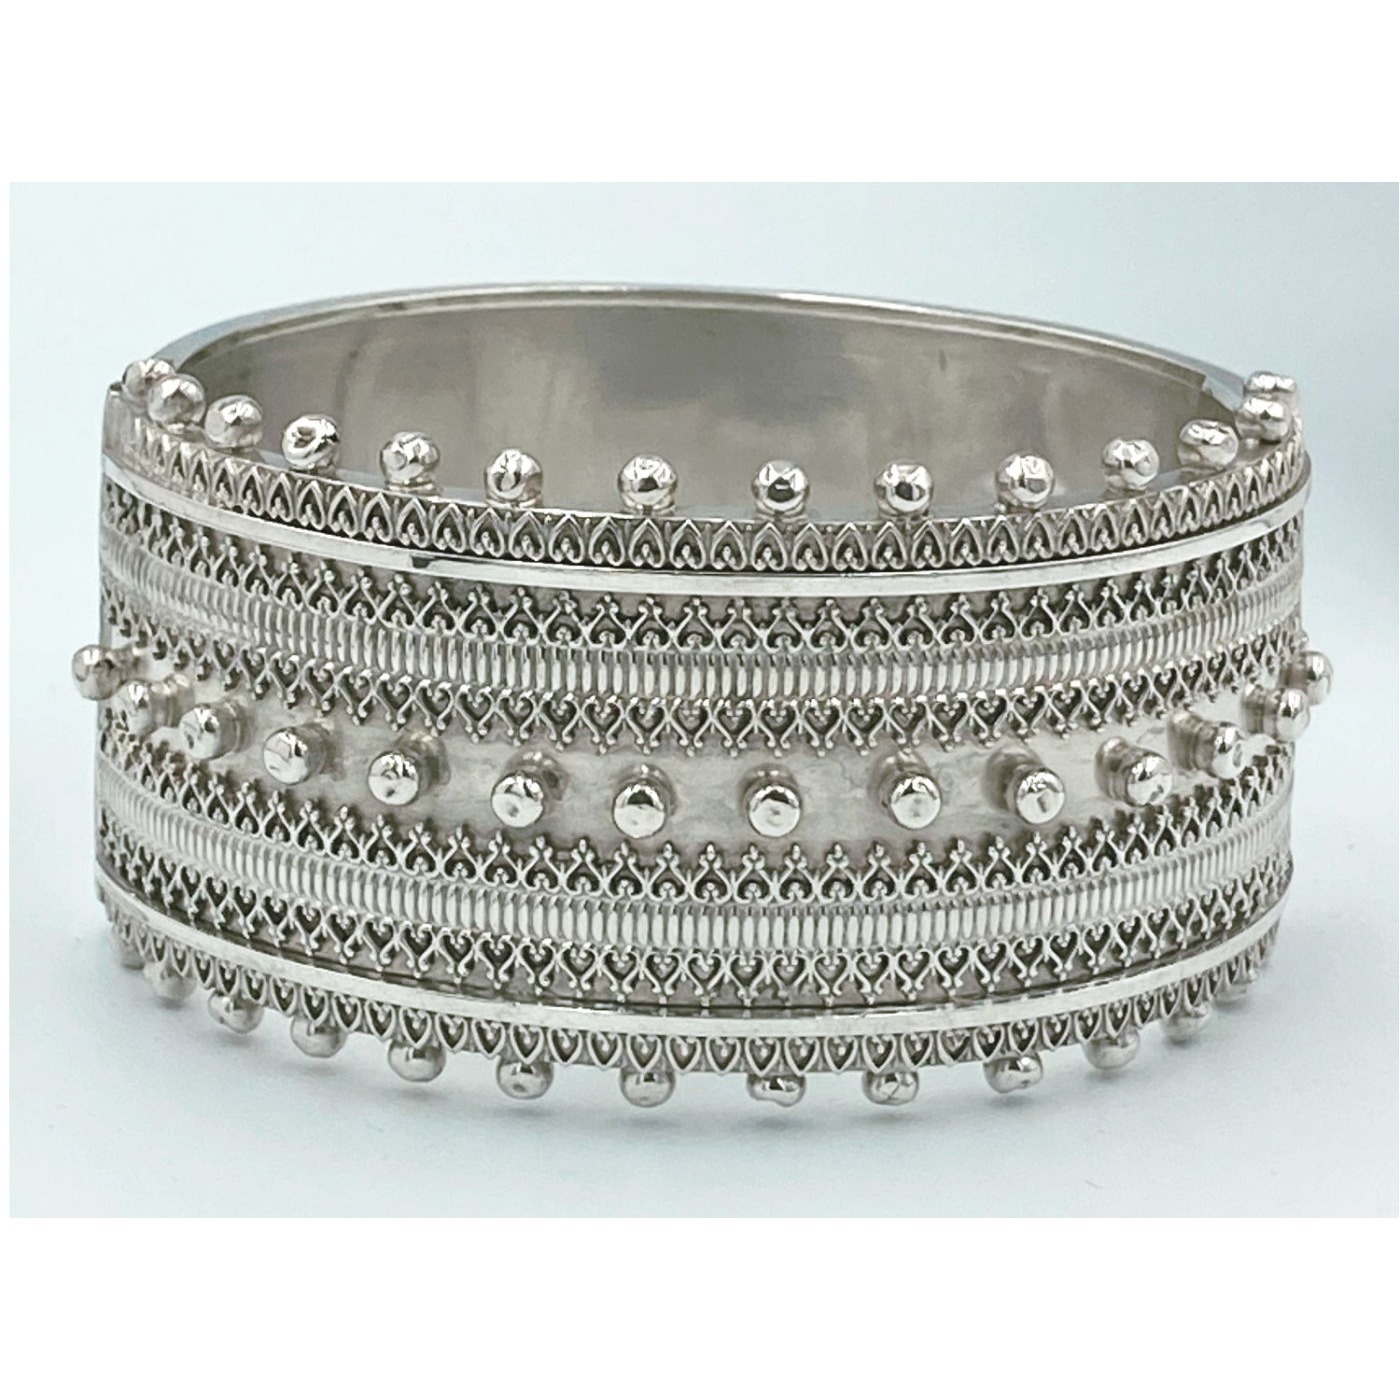 Larger Extraordinary Beaded Edge Exquisite Victorian Silver Bangle